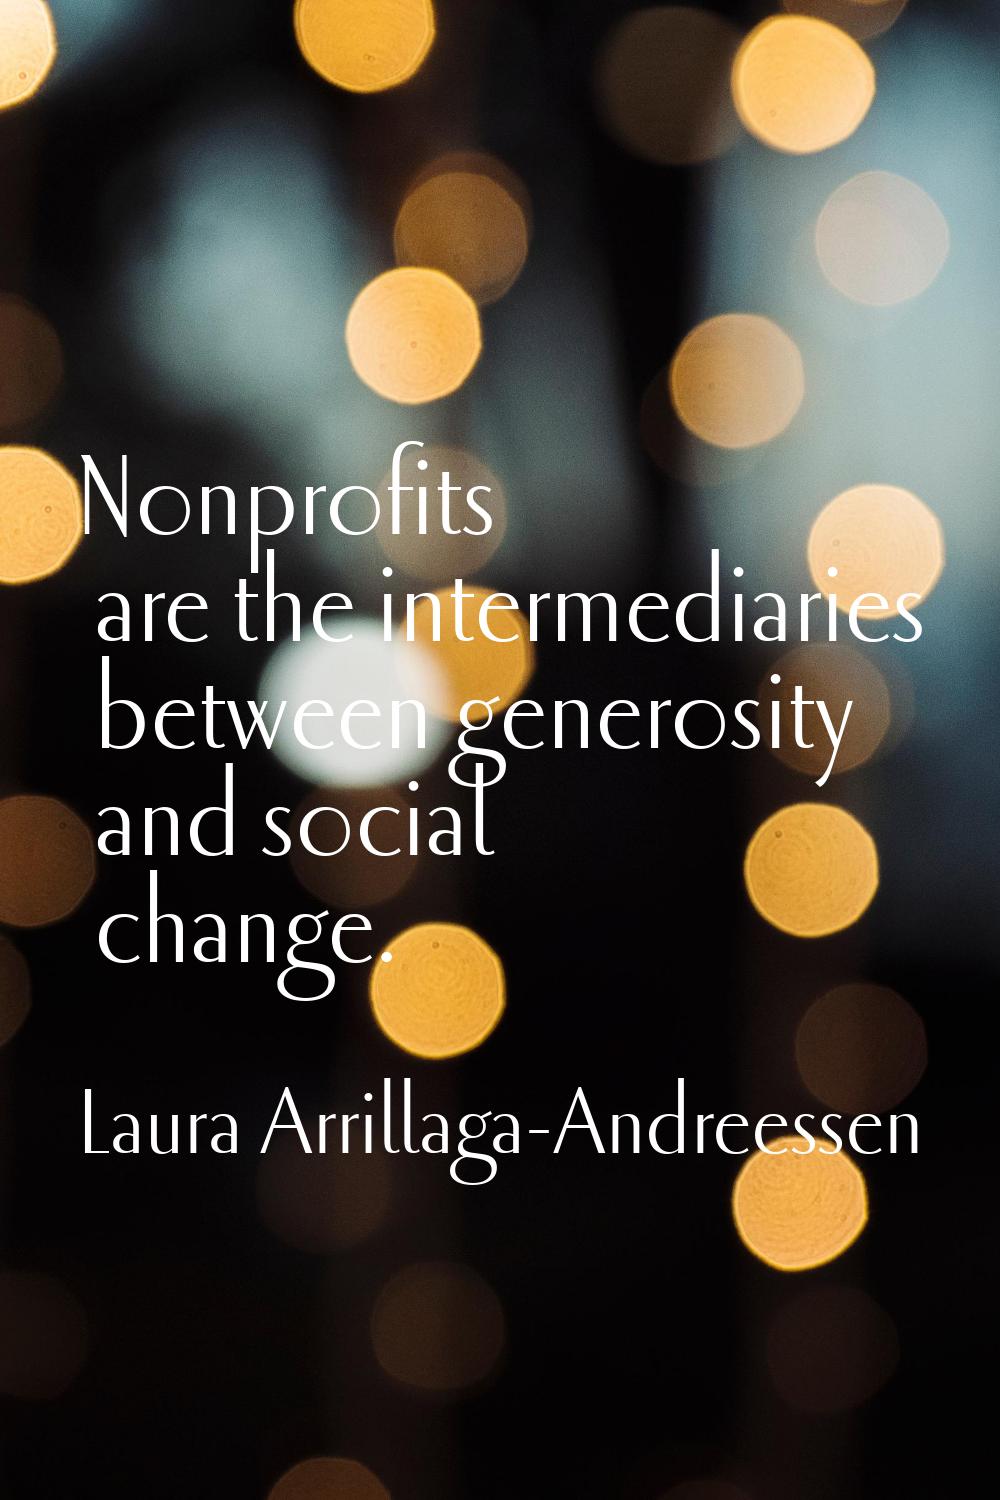 Nonprofits are the intermediaries between generosity and social change.